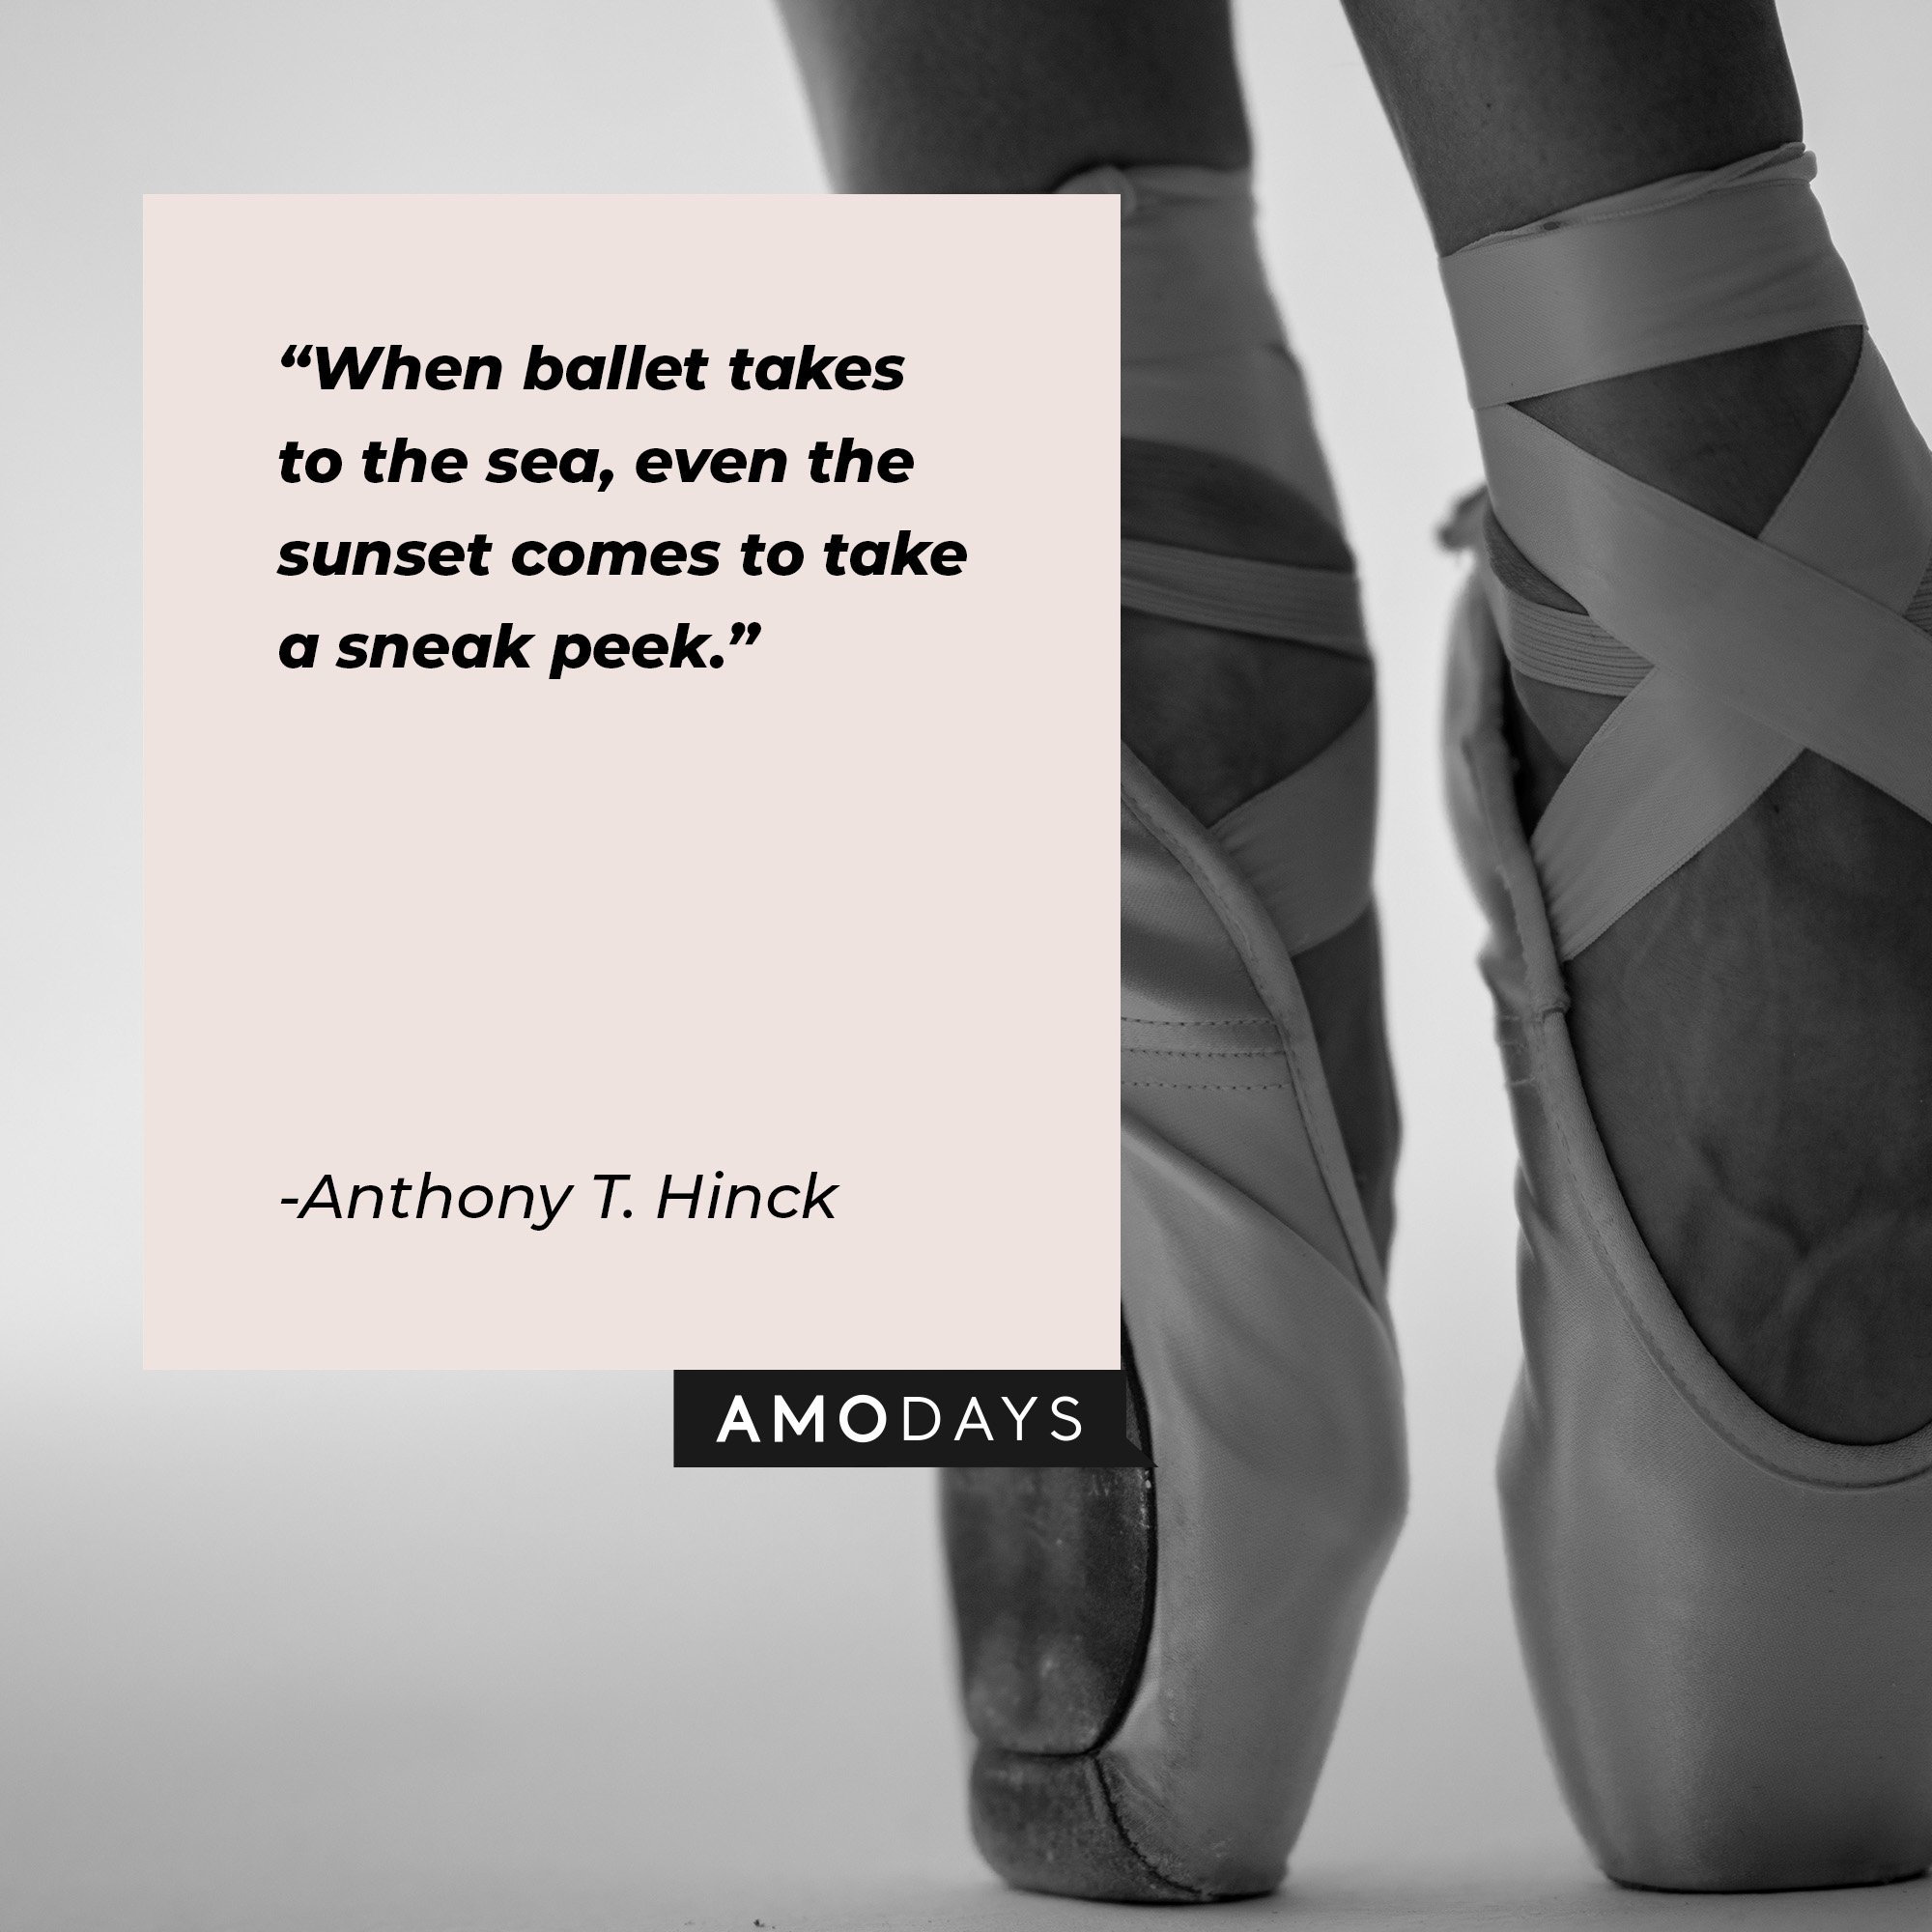 Anthony T. Hinck’s quote: "When ballet takes to the sea, even the sunset comes to take a sneak peek." | Image: AmoDays 